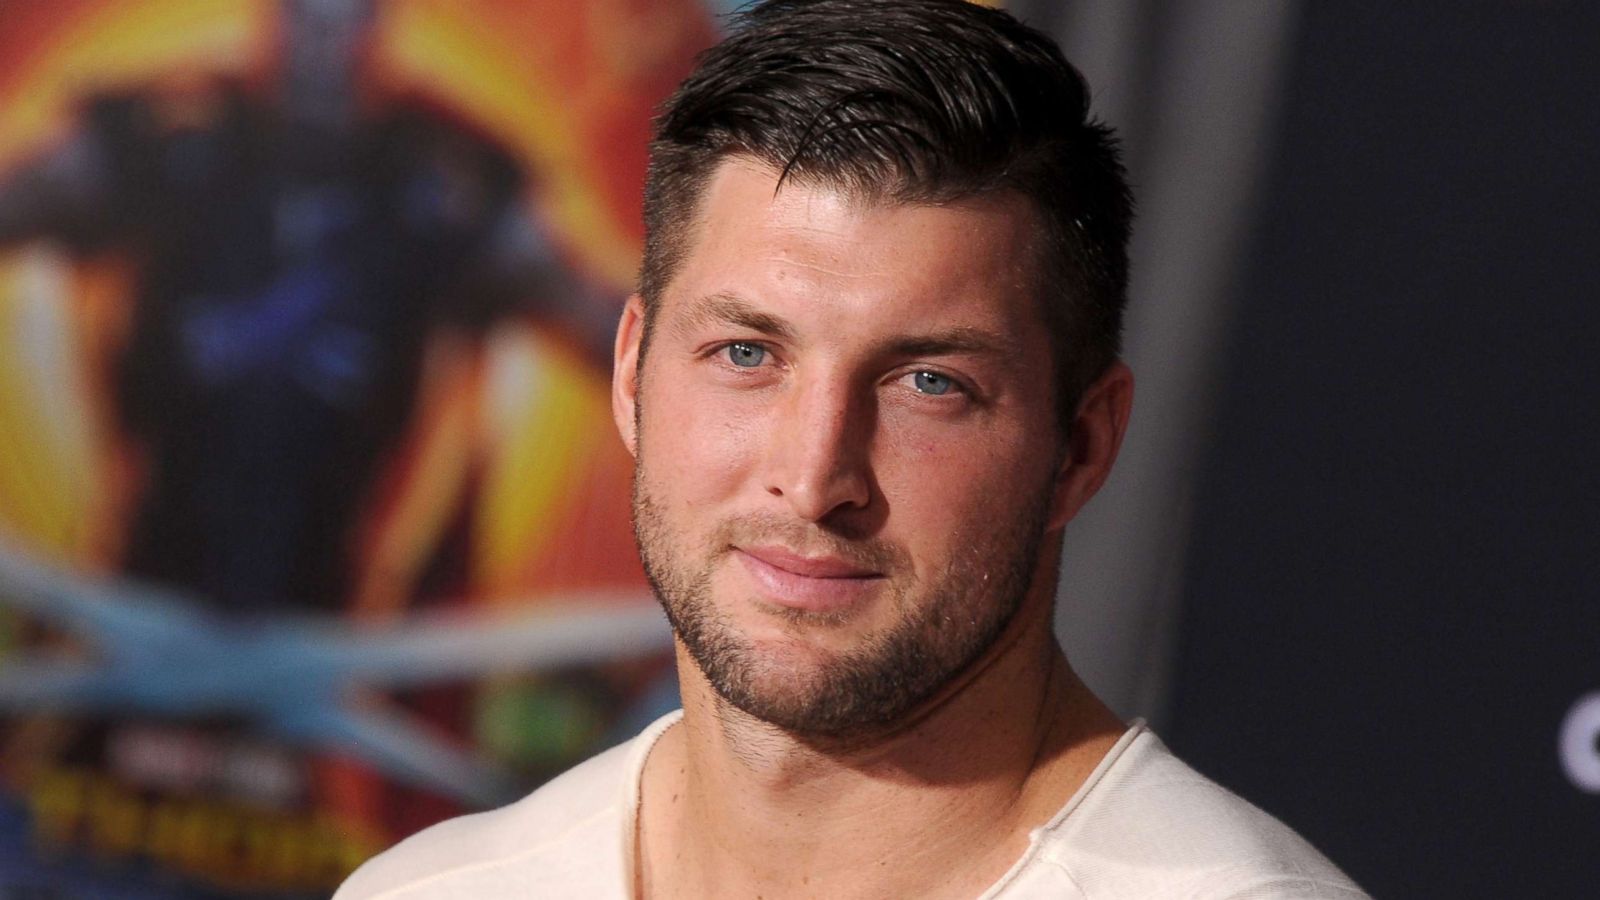 PHOTO: Tim Tebow arrives at the premiere of Disney and Marvel's "Thor: Ragnarok" at the El Capitan Theatre, Oct. 10, 2017, in Los Angeles.